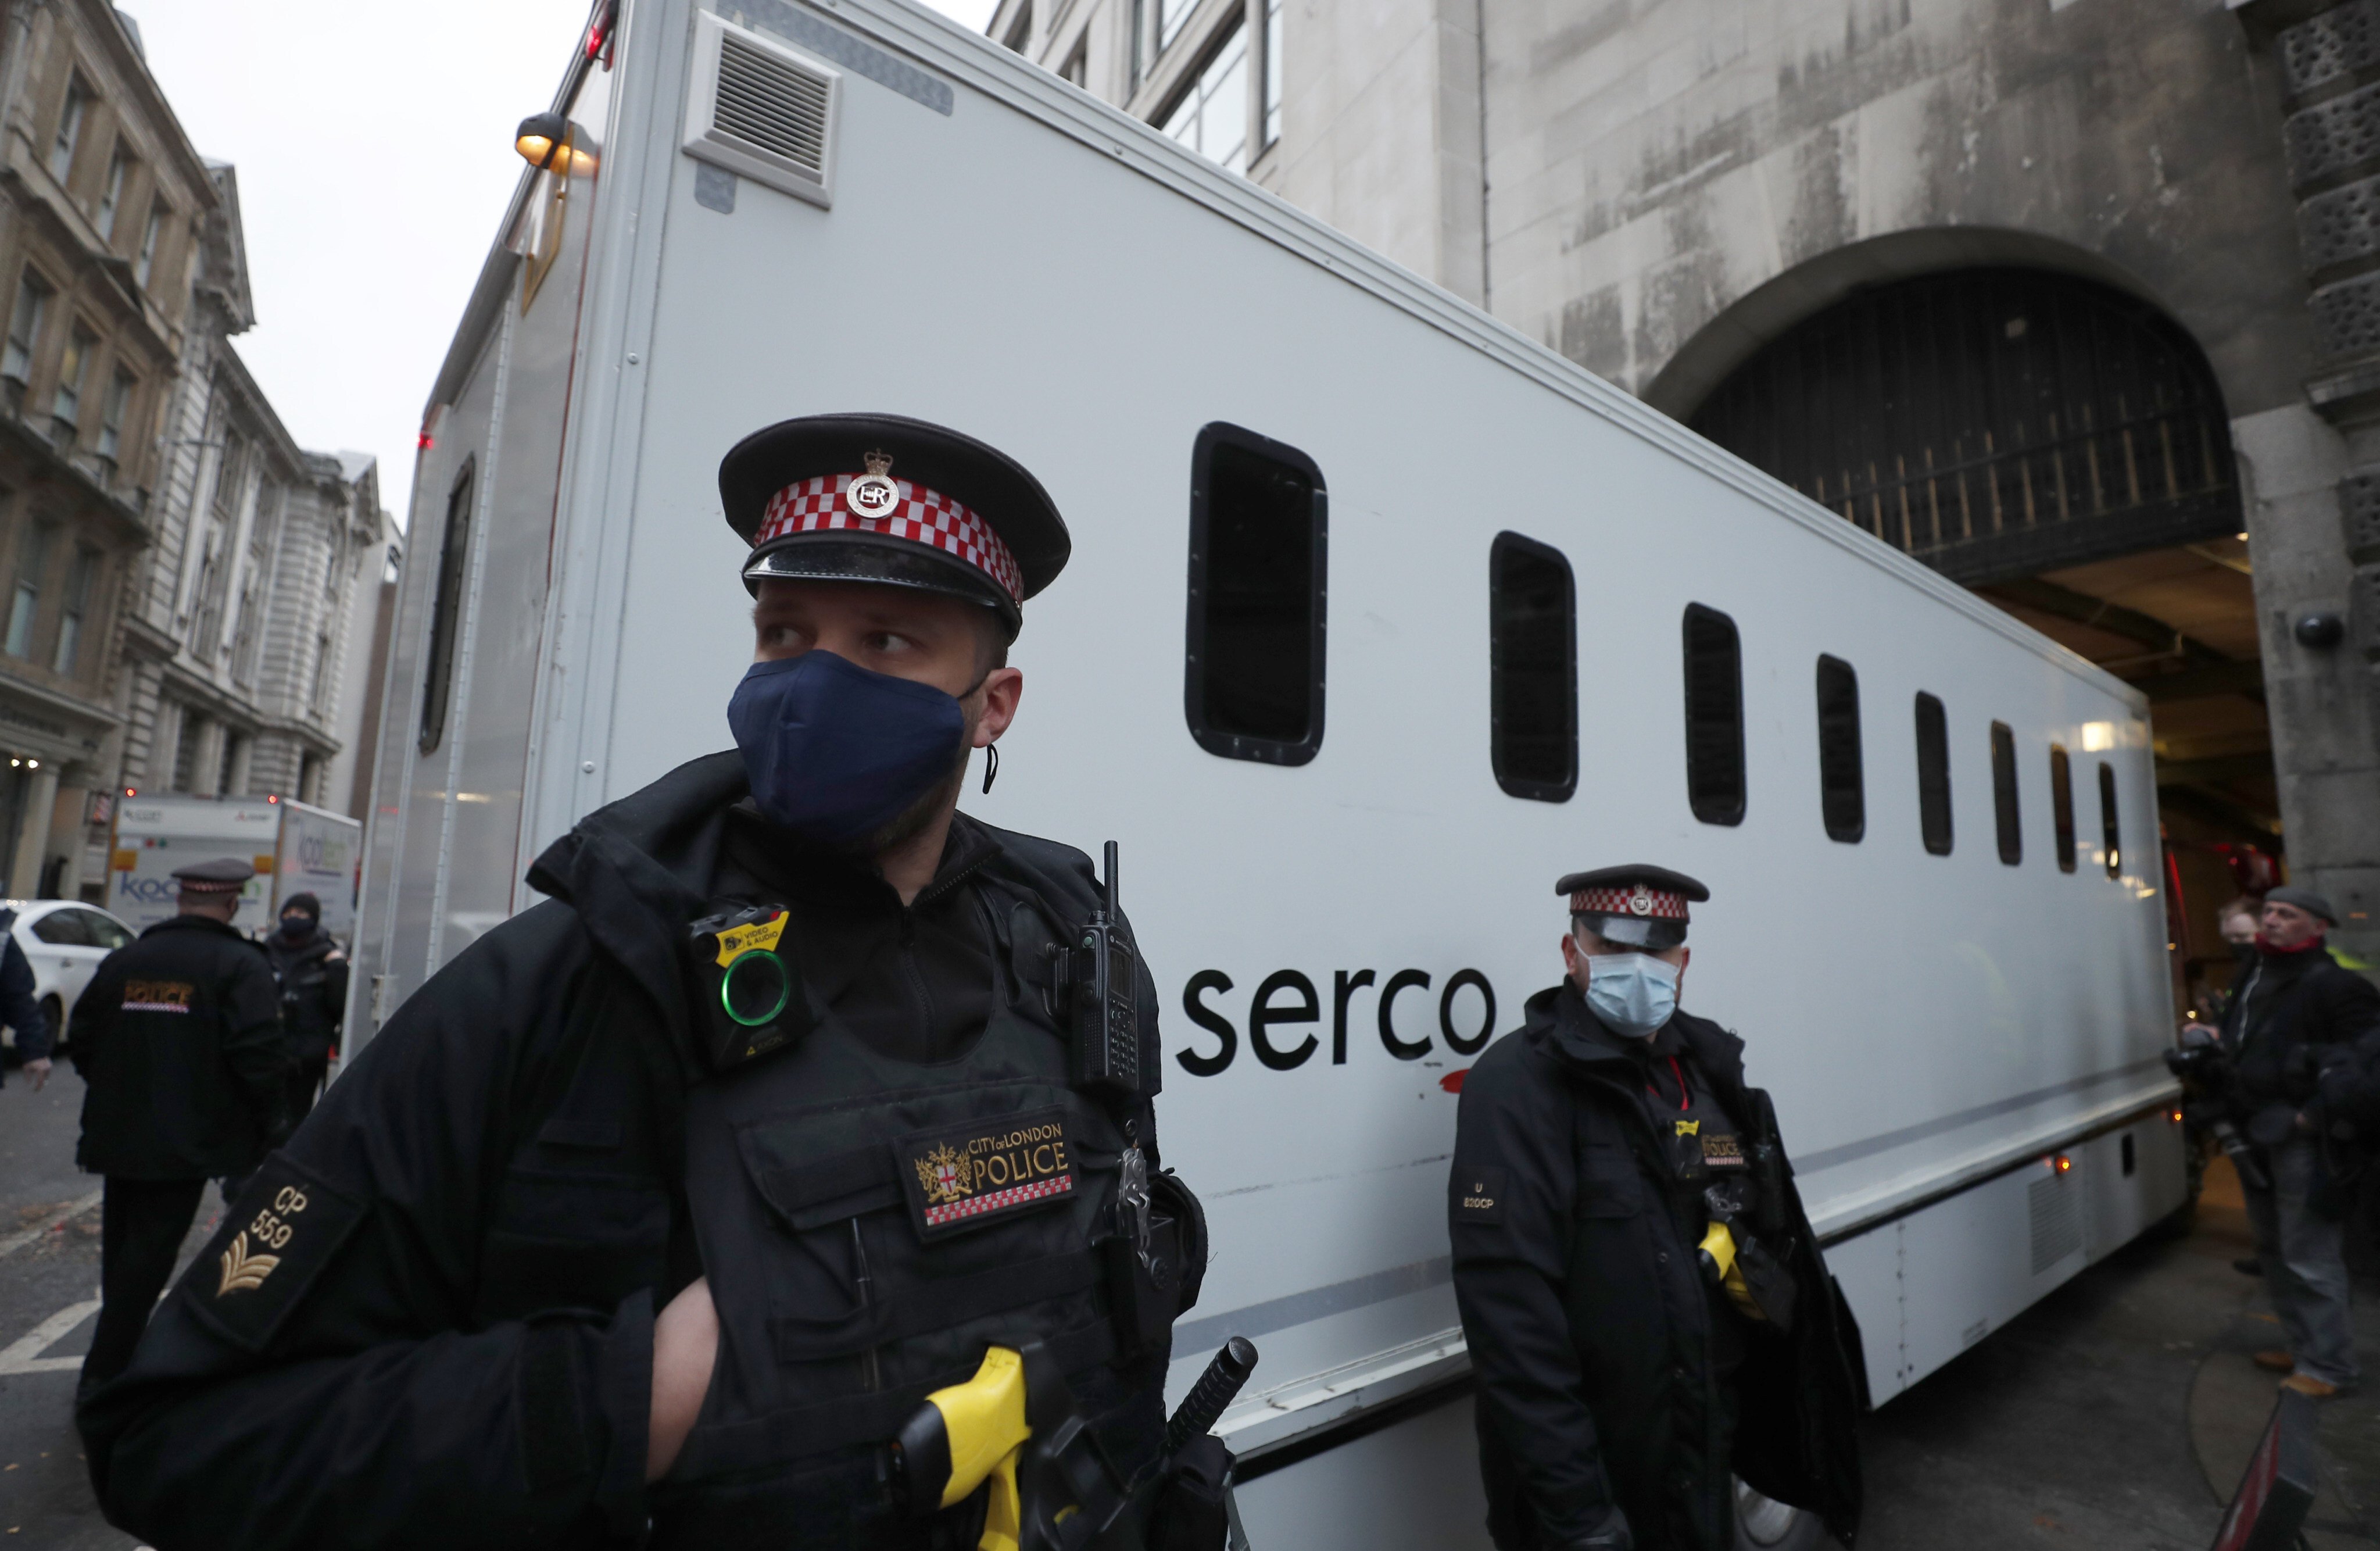 Police guard a prisoner transport van as it arrives at the Old Bailey court in London. Photo: AP